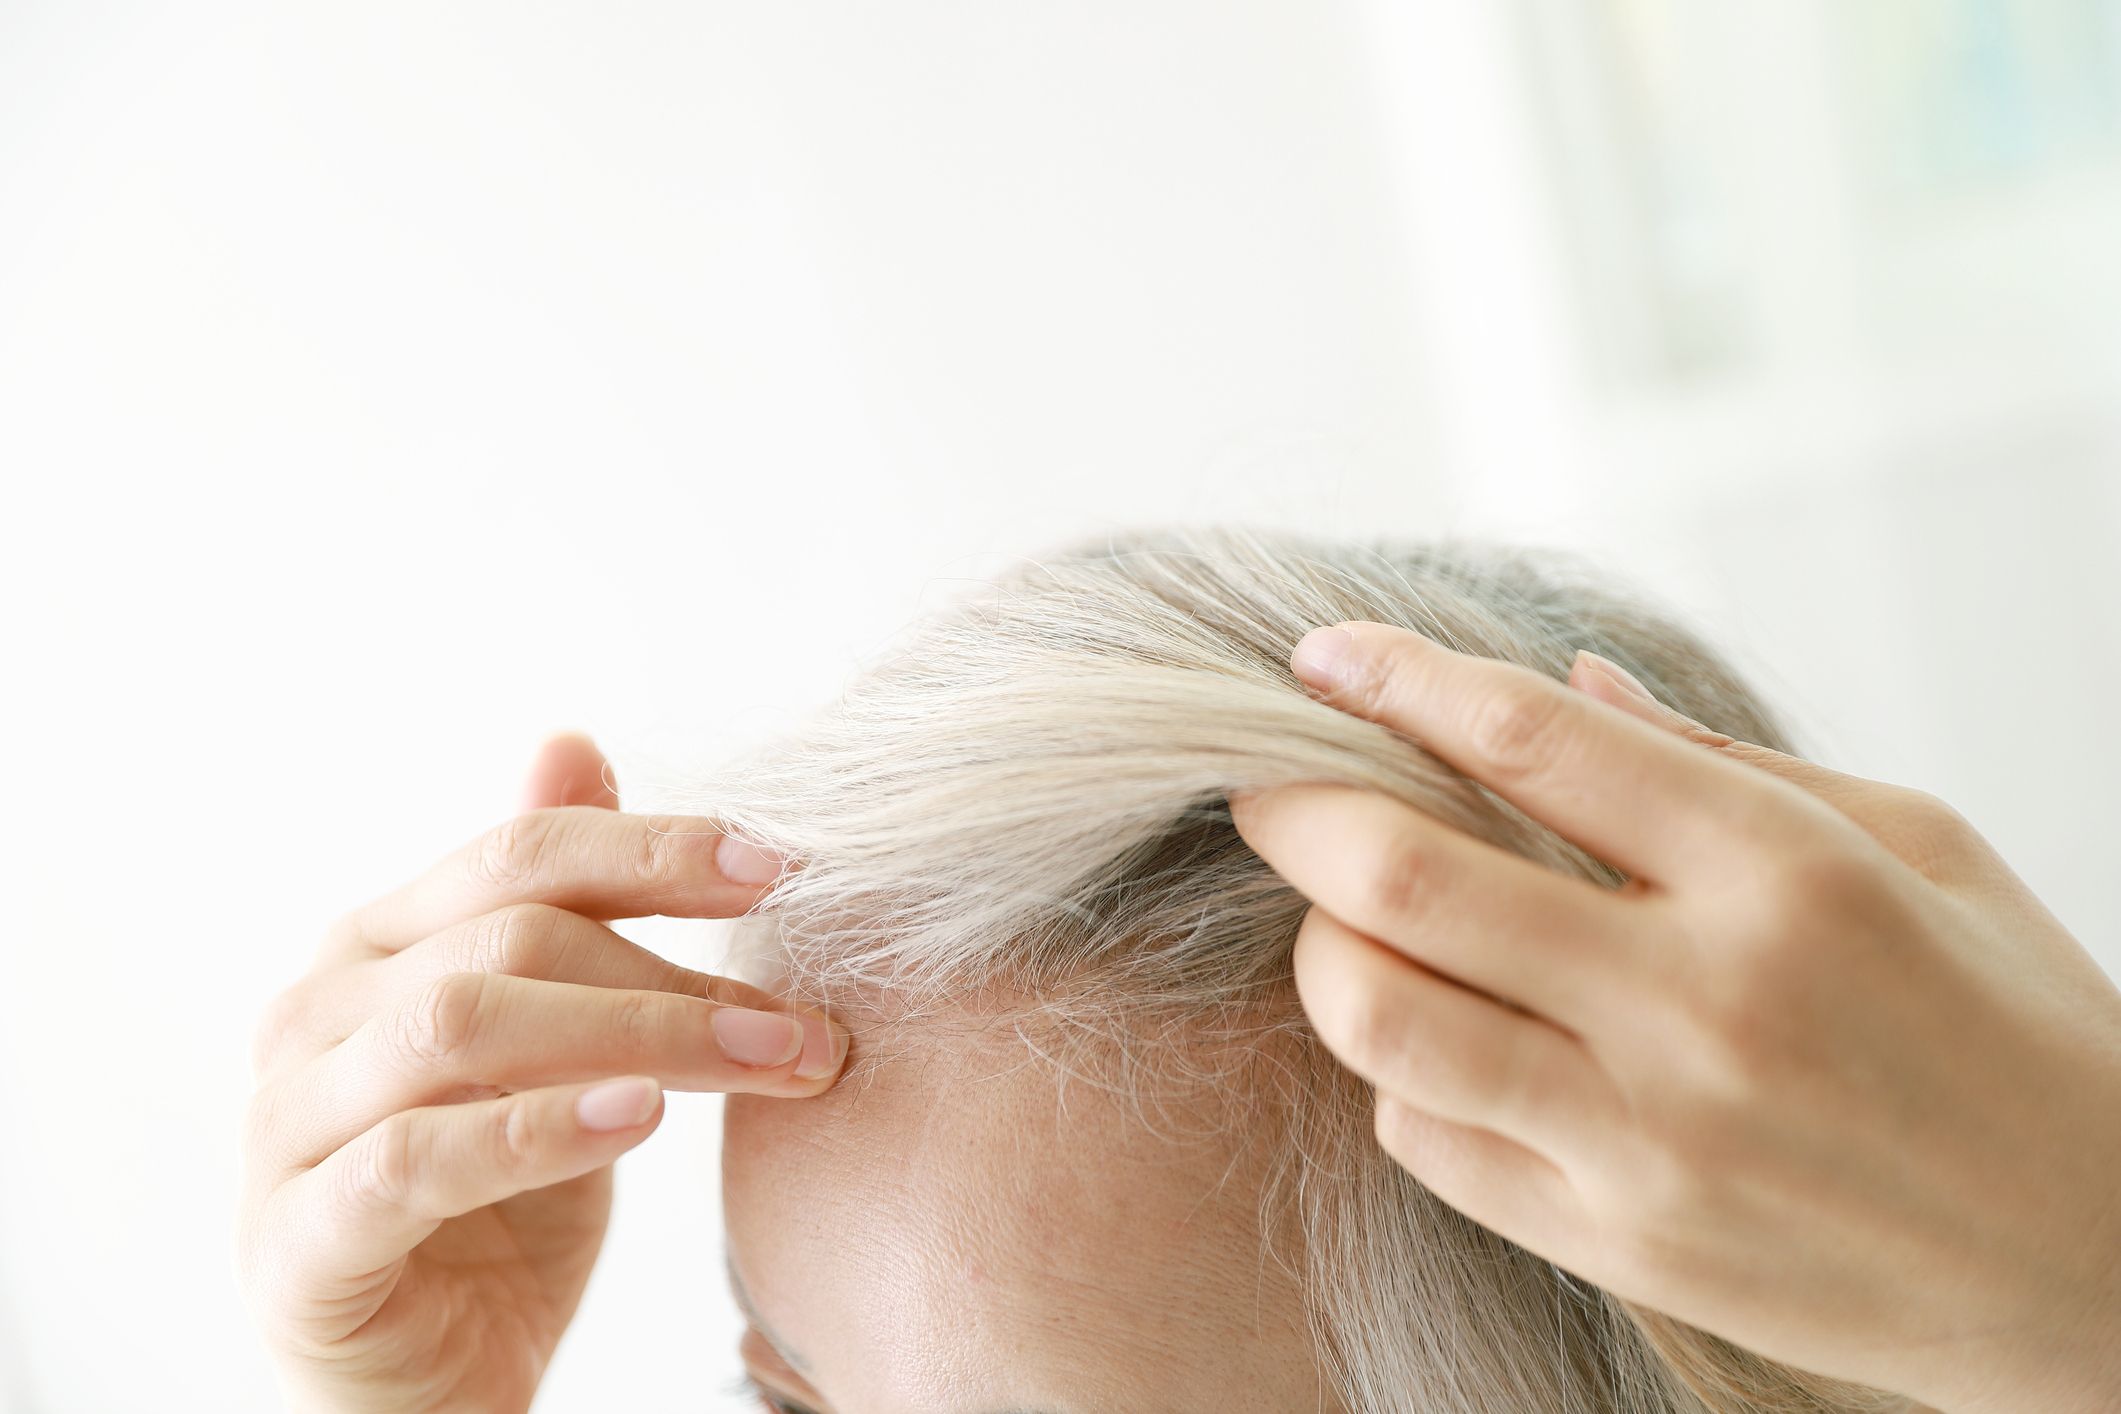 Hair loss & thinning hair mistakes to avoid